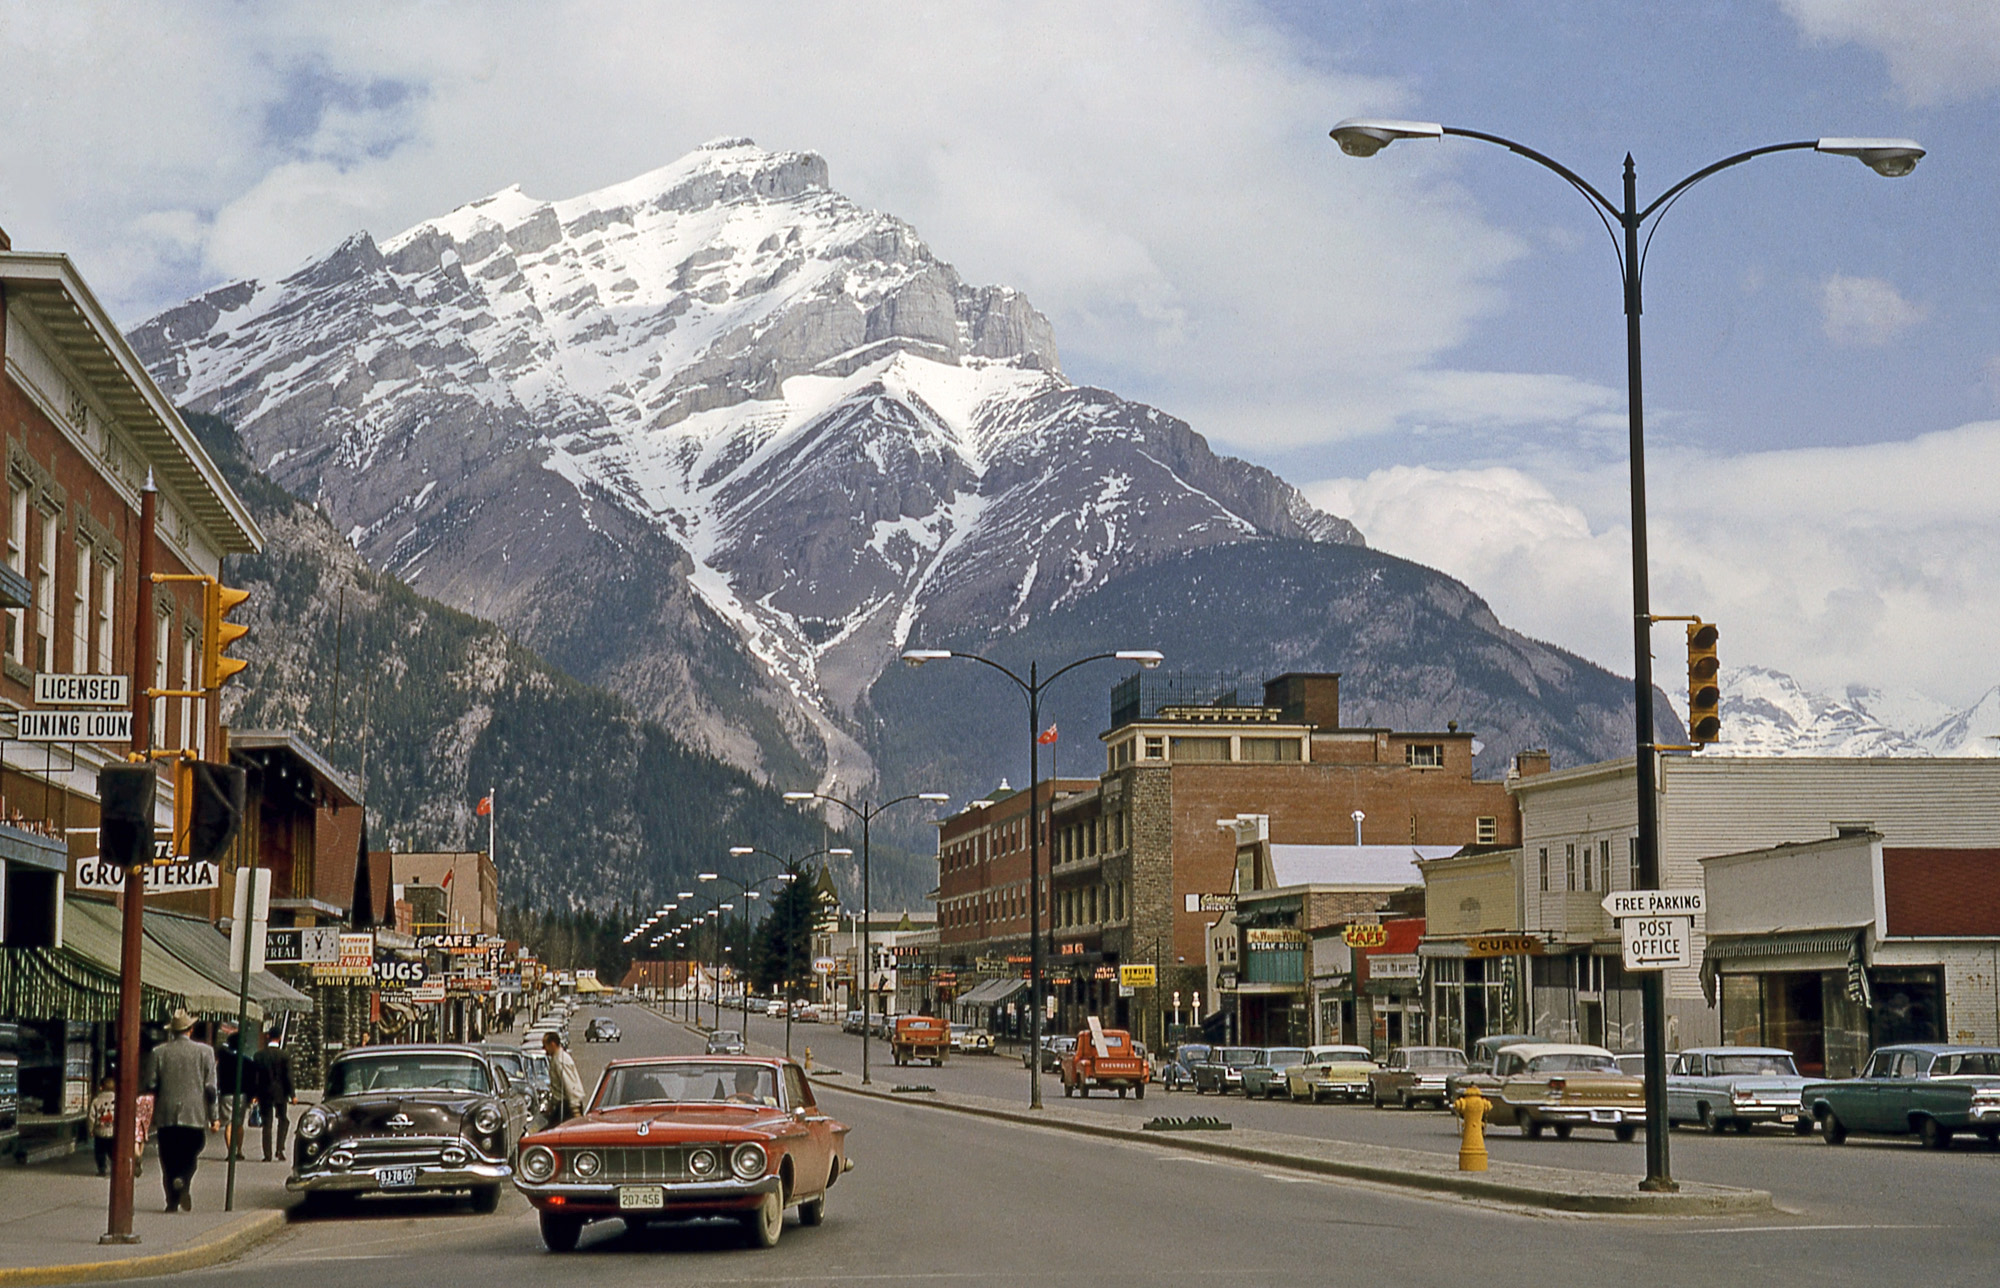 Banff, Alberta, Canada, sometime in the early Sixties. Scanned from a box of Kodachrome slides I found at a flea market. View full size.